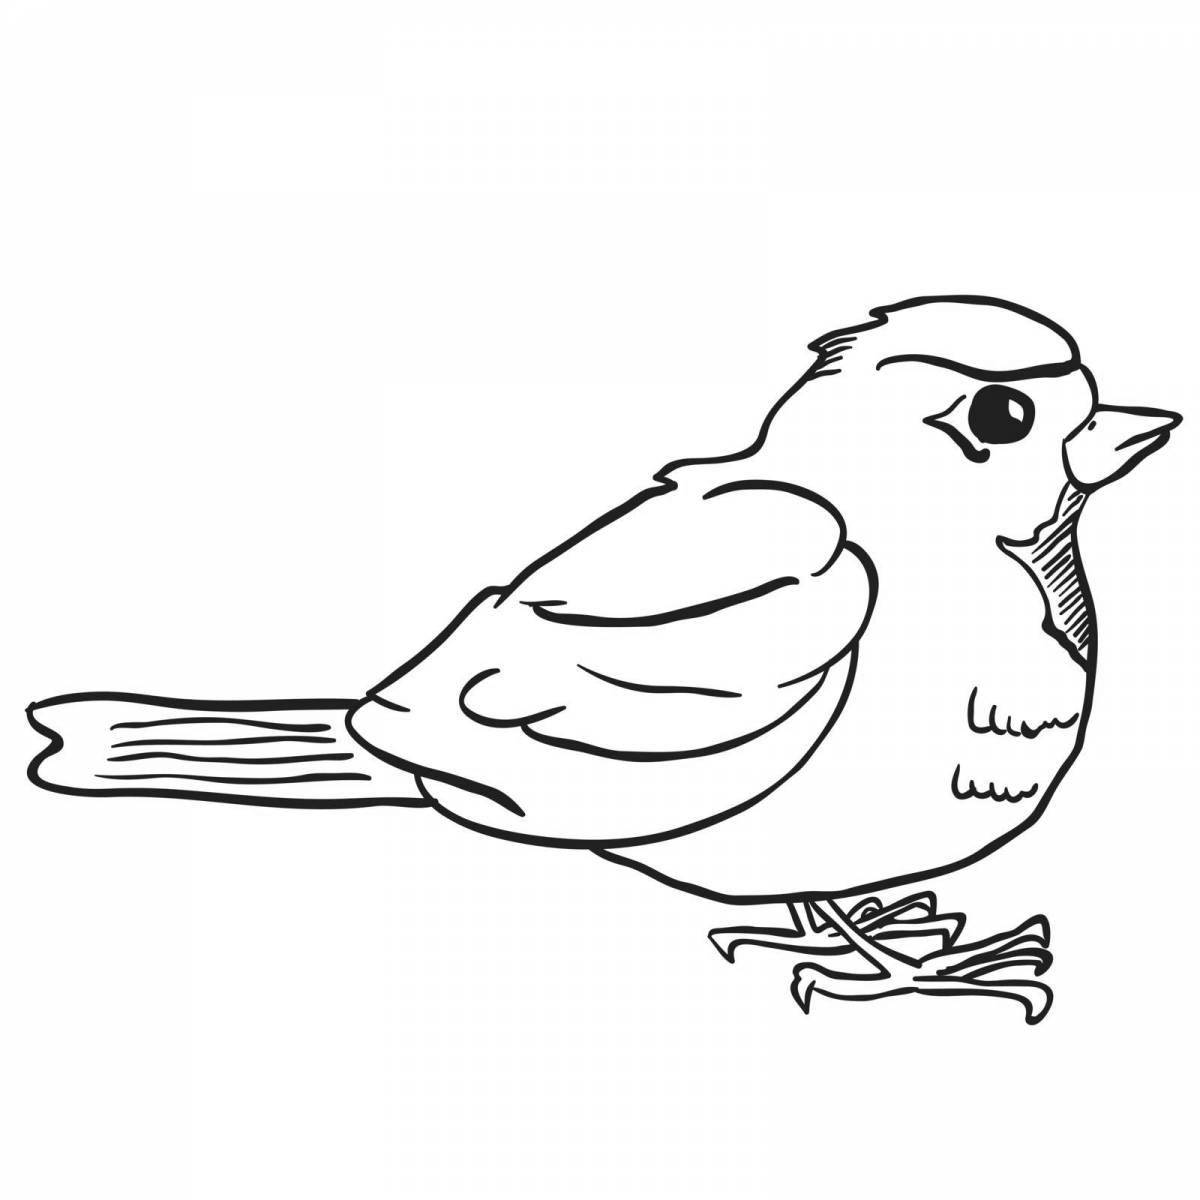 To the story of Paustovsky disheveled sparrow #3